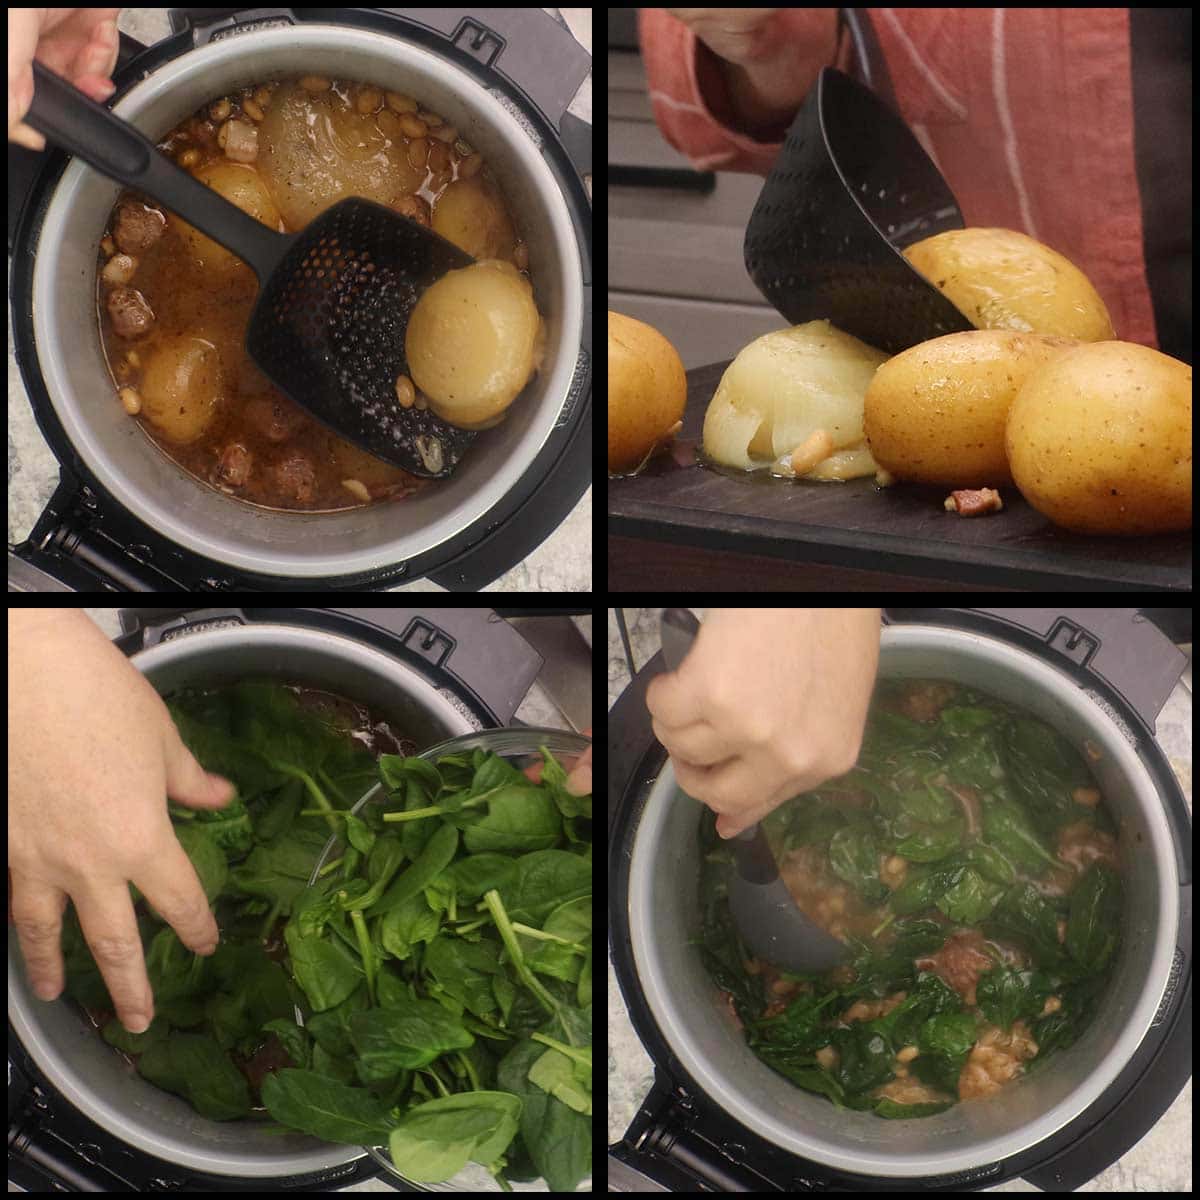 removing the whole potatoes and onions and adding the spinach to the inner pot. 